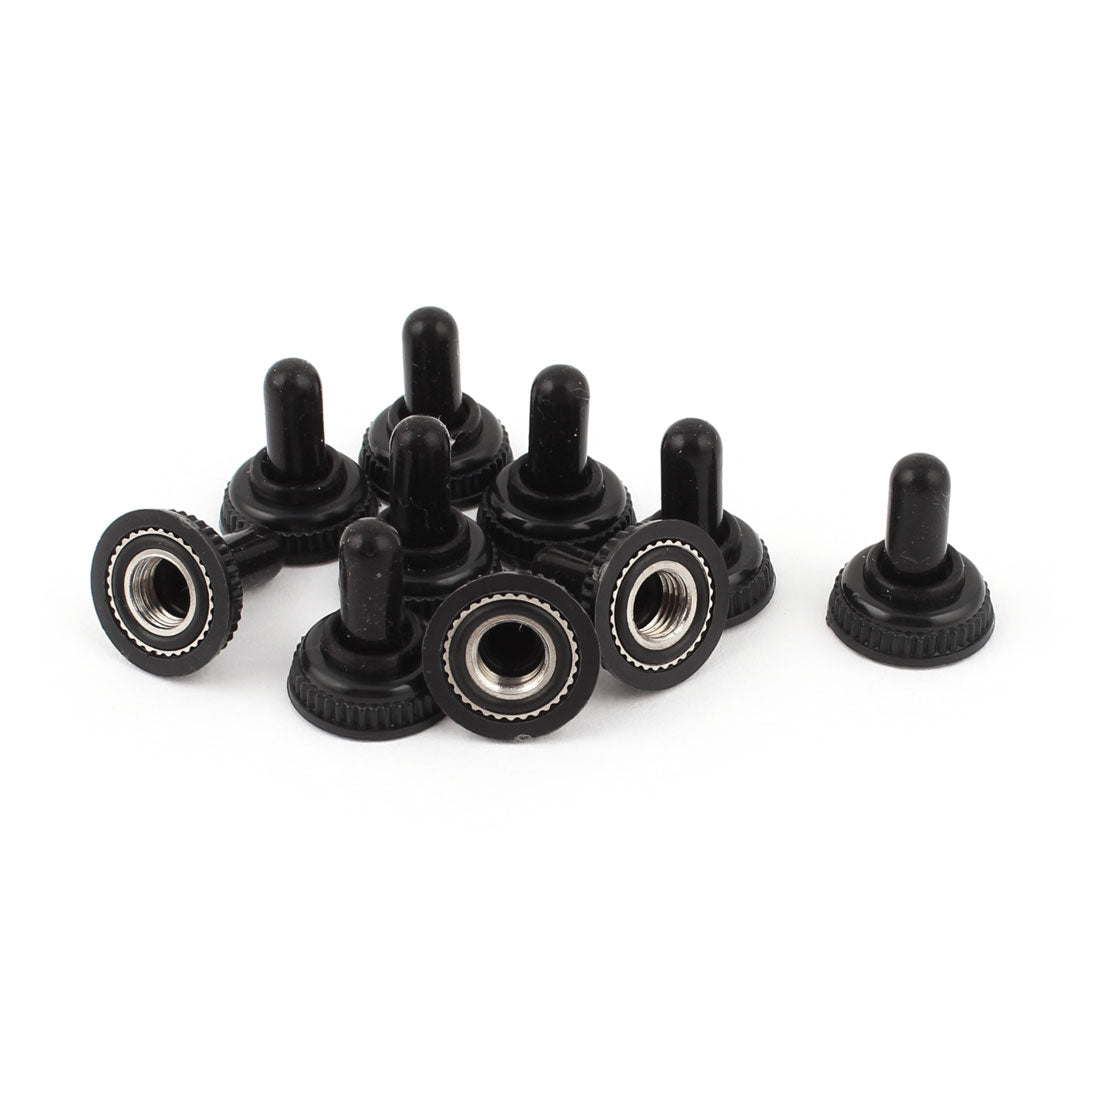 uxcell Uxcell 10PCS Mini Toggle Switch Waterproof Boot Rubber Cover Cap Black